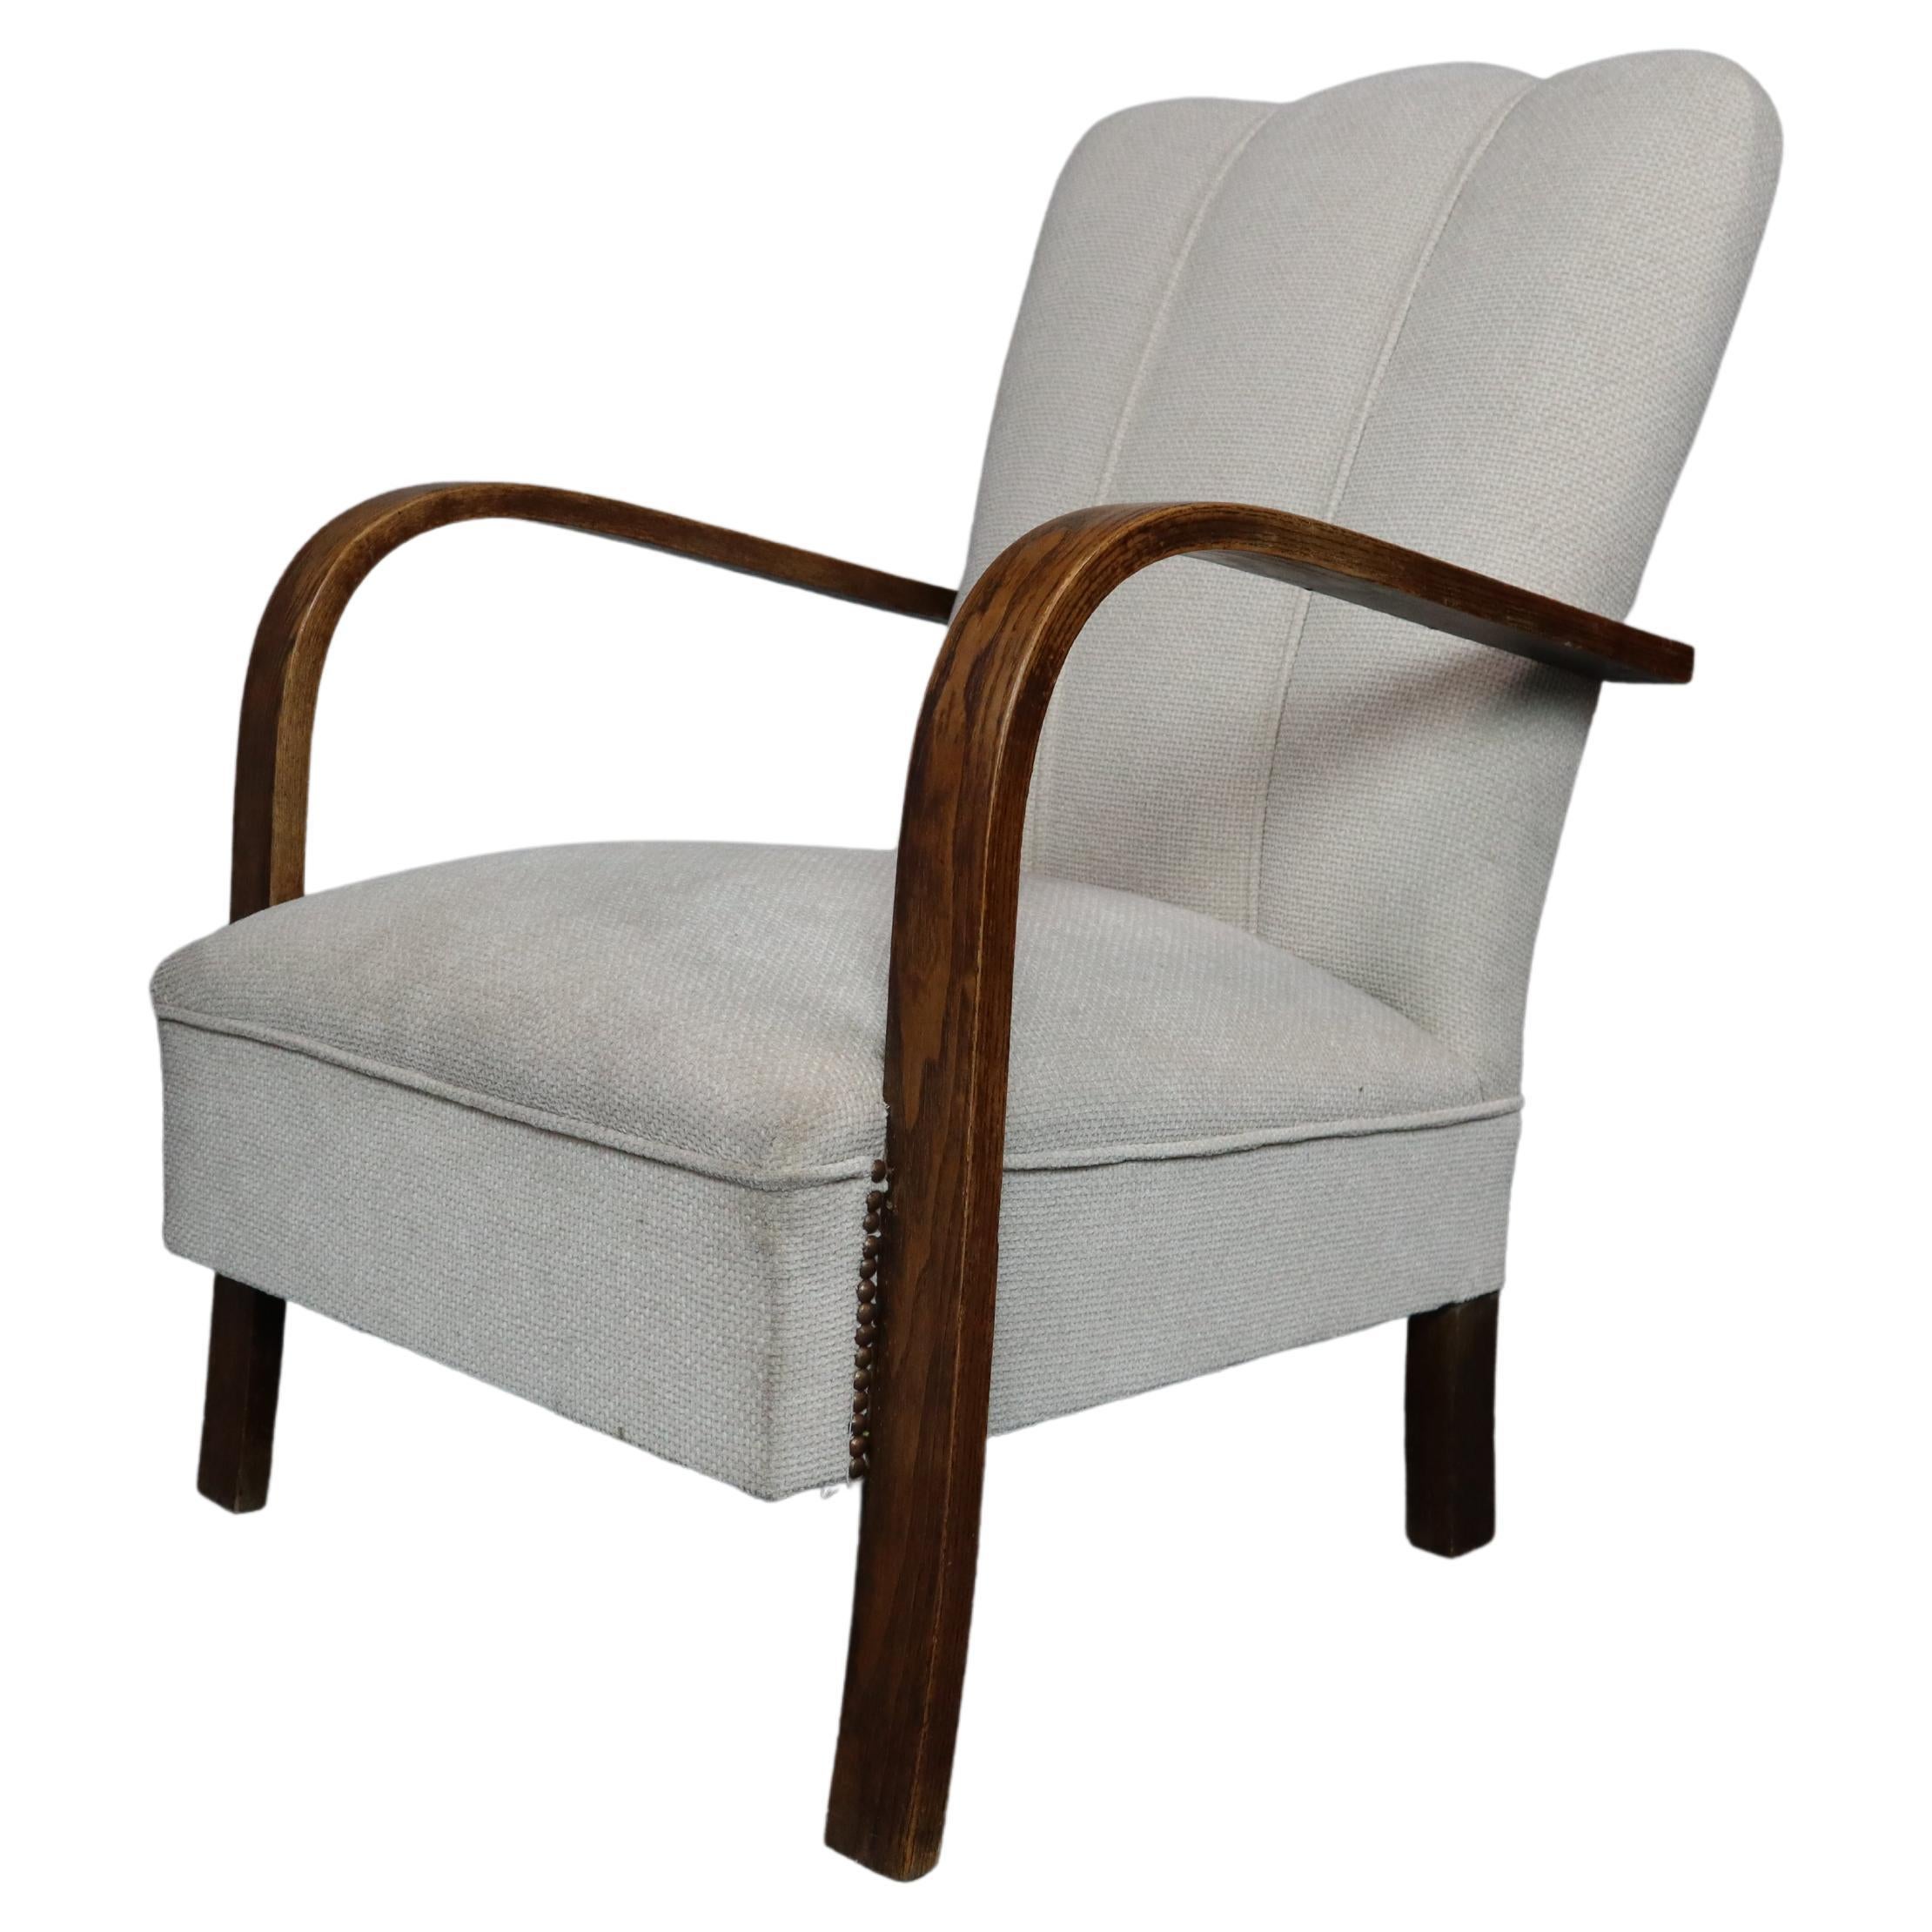 Early 20th Century Art-Deco Armchair, Oak and Fabric